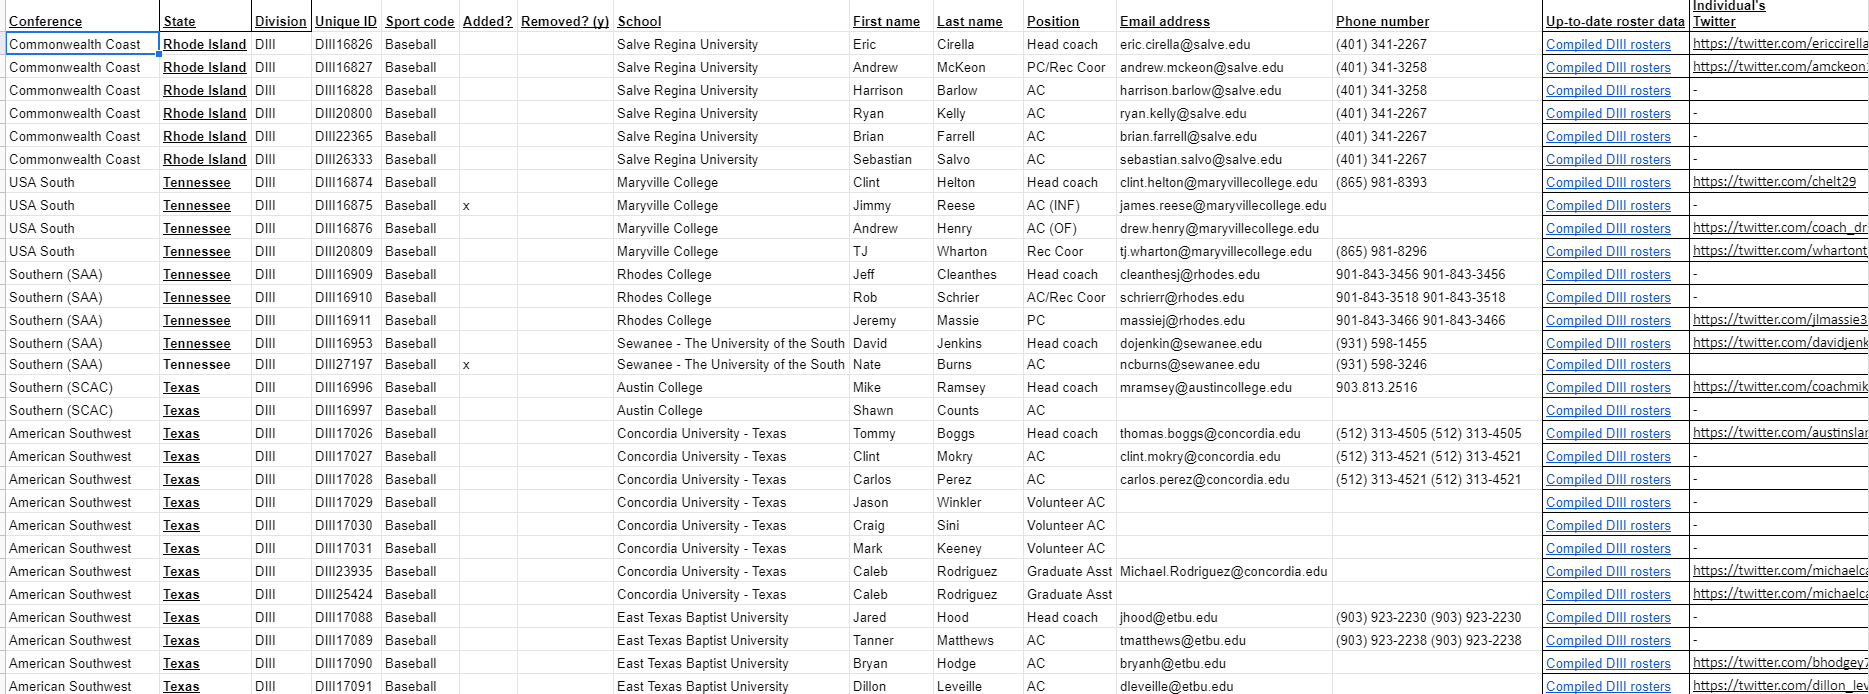 Baseball: Complete list of college coaches' emails, phone numbers and  social-media accounts - Contact College Coaches